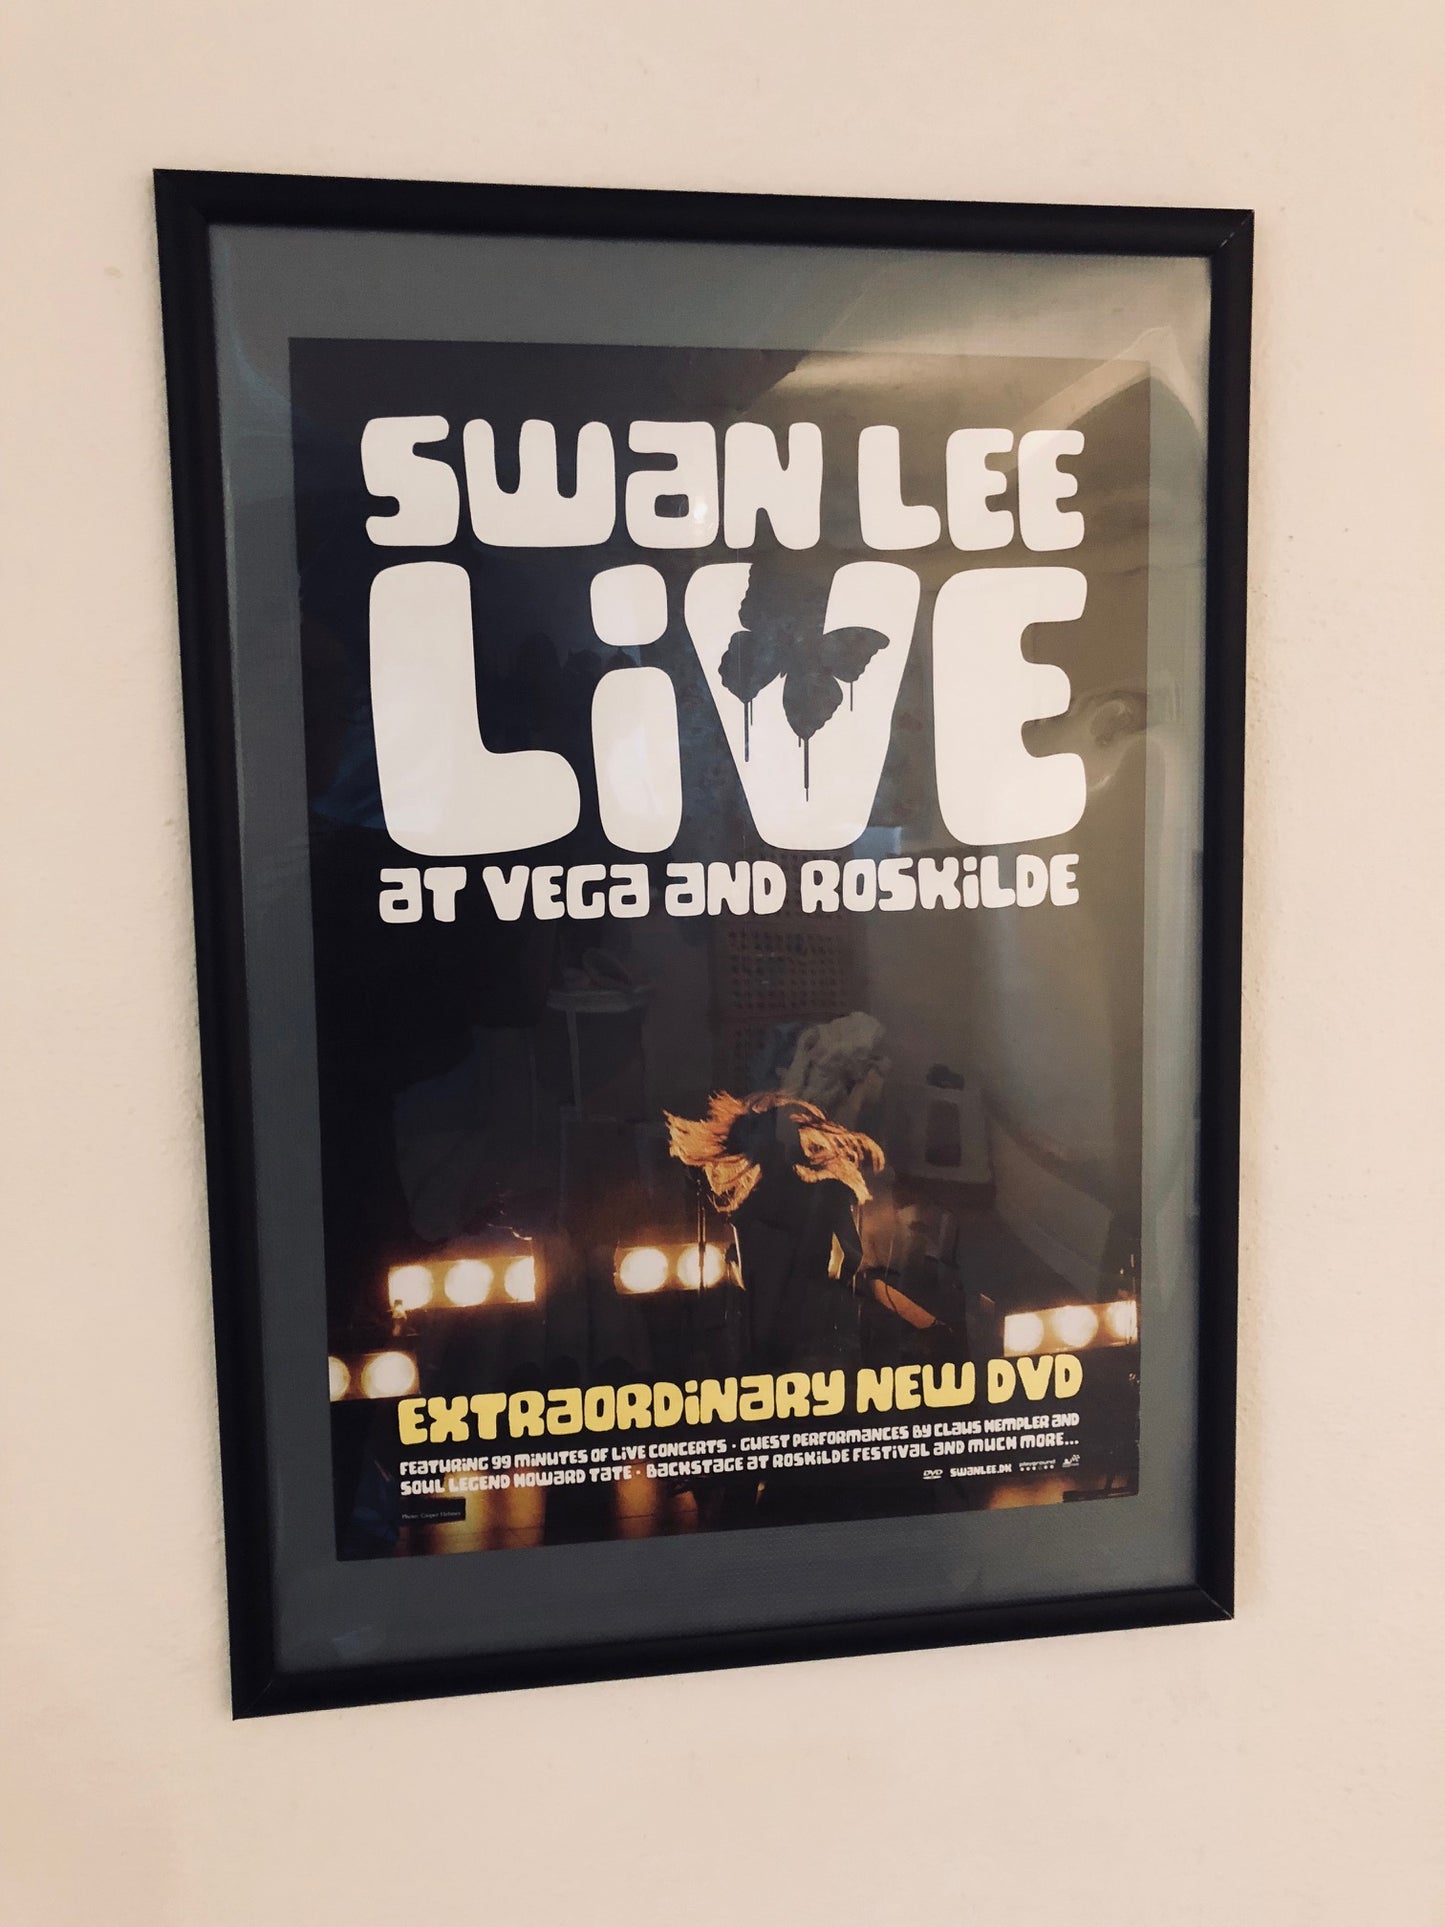 Swan Lee - Live at Vega and Roskilde - Poster